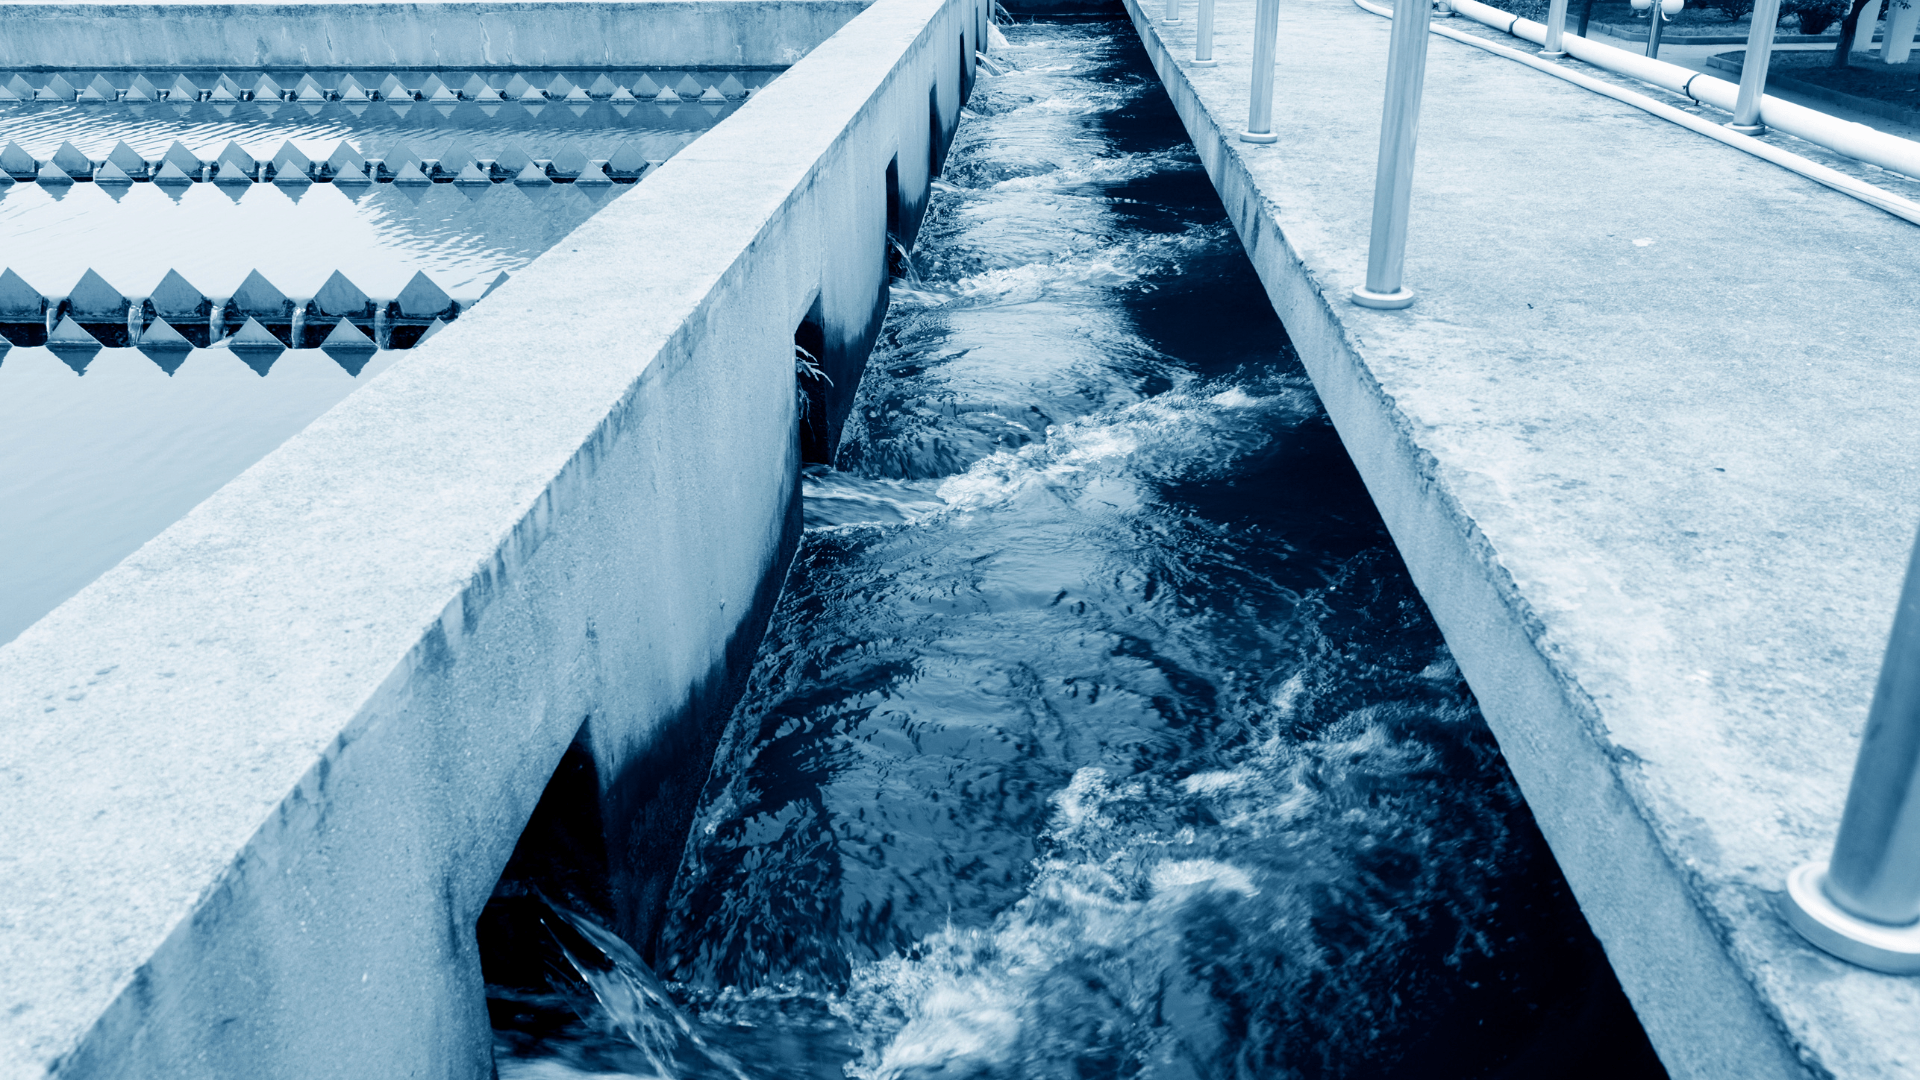 A close up image of a water treatment facility.